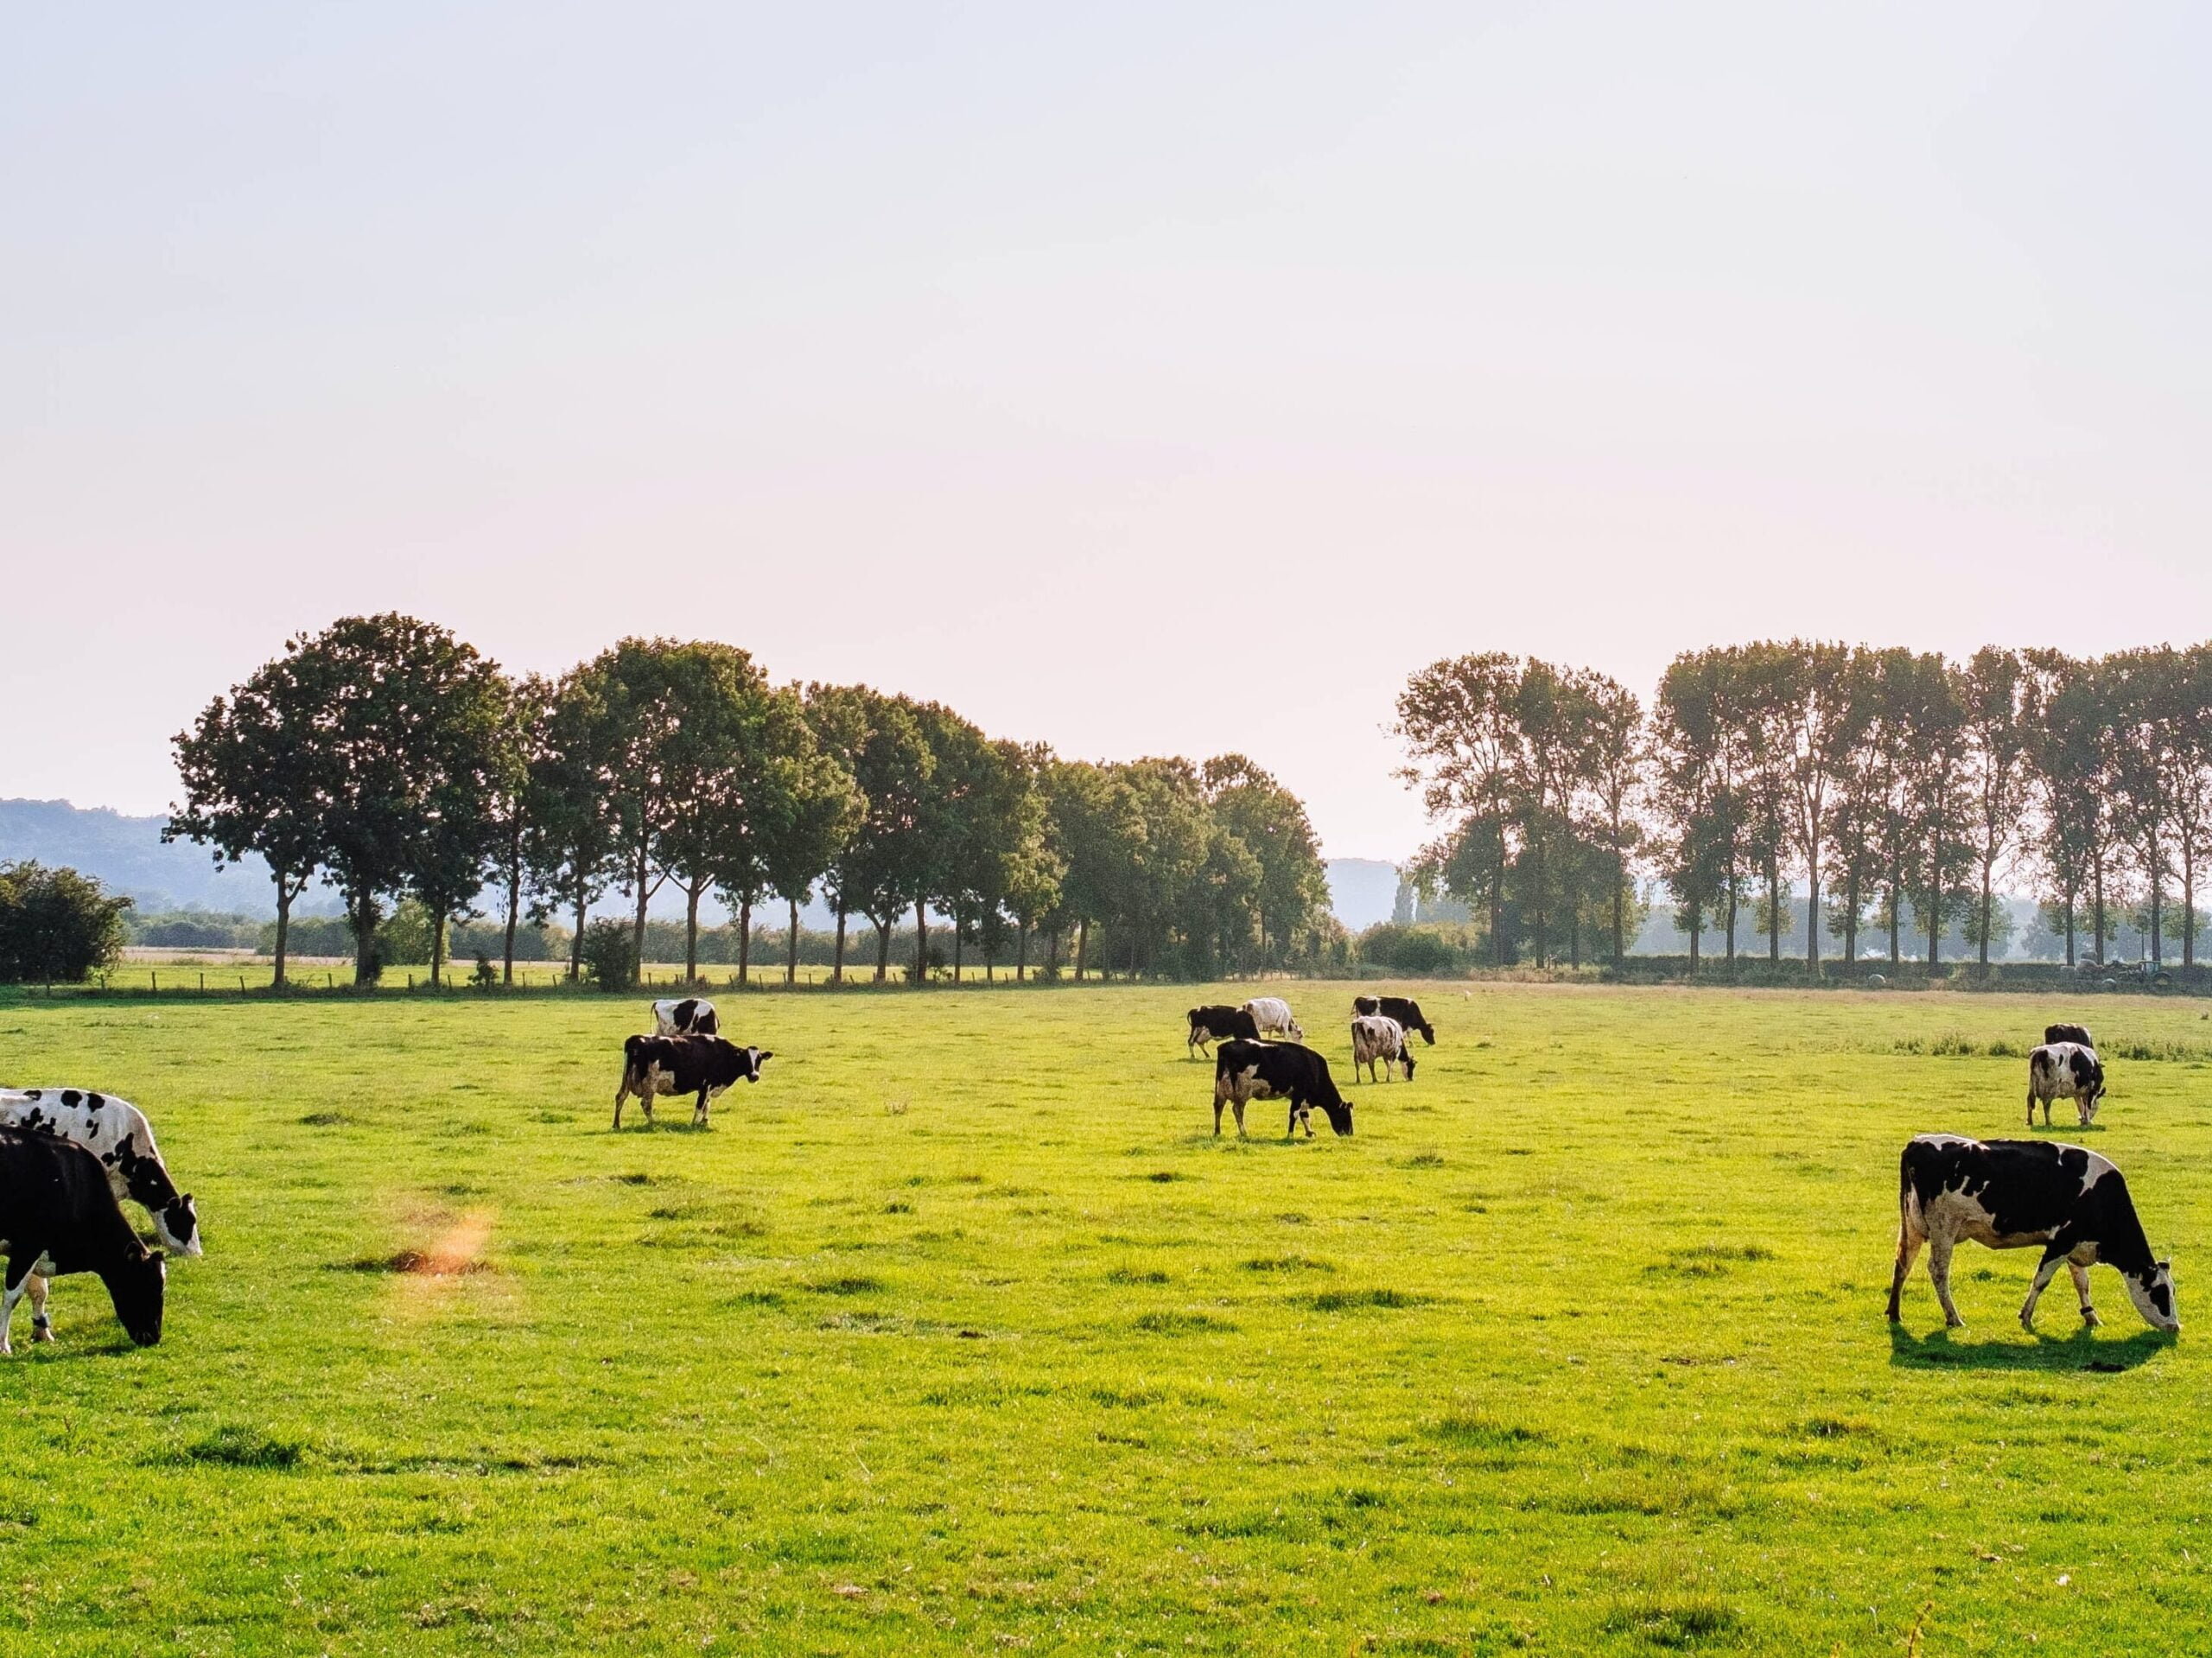 Cows grazing in an green open field on a sunny day with large trees in the background